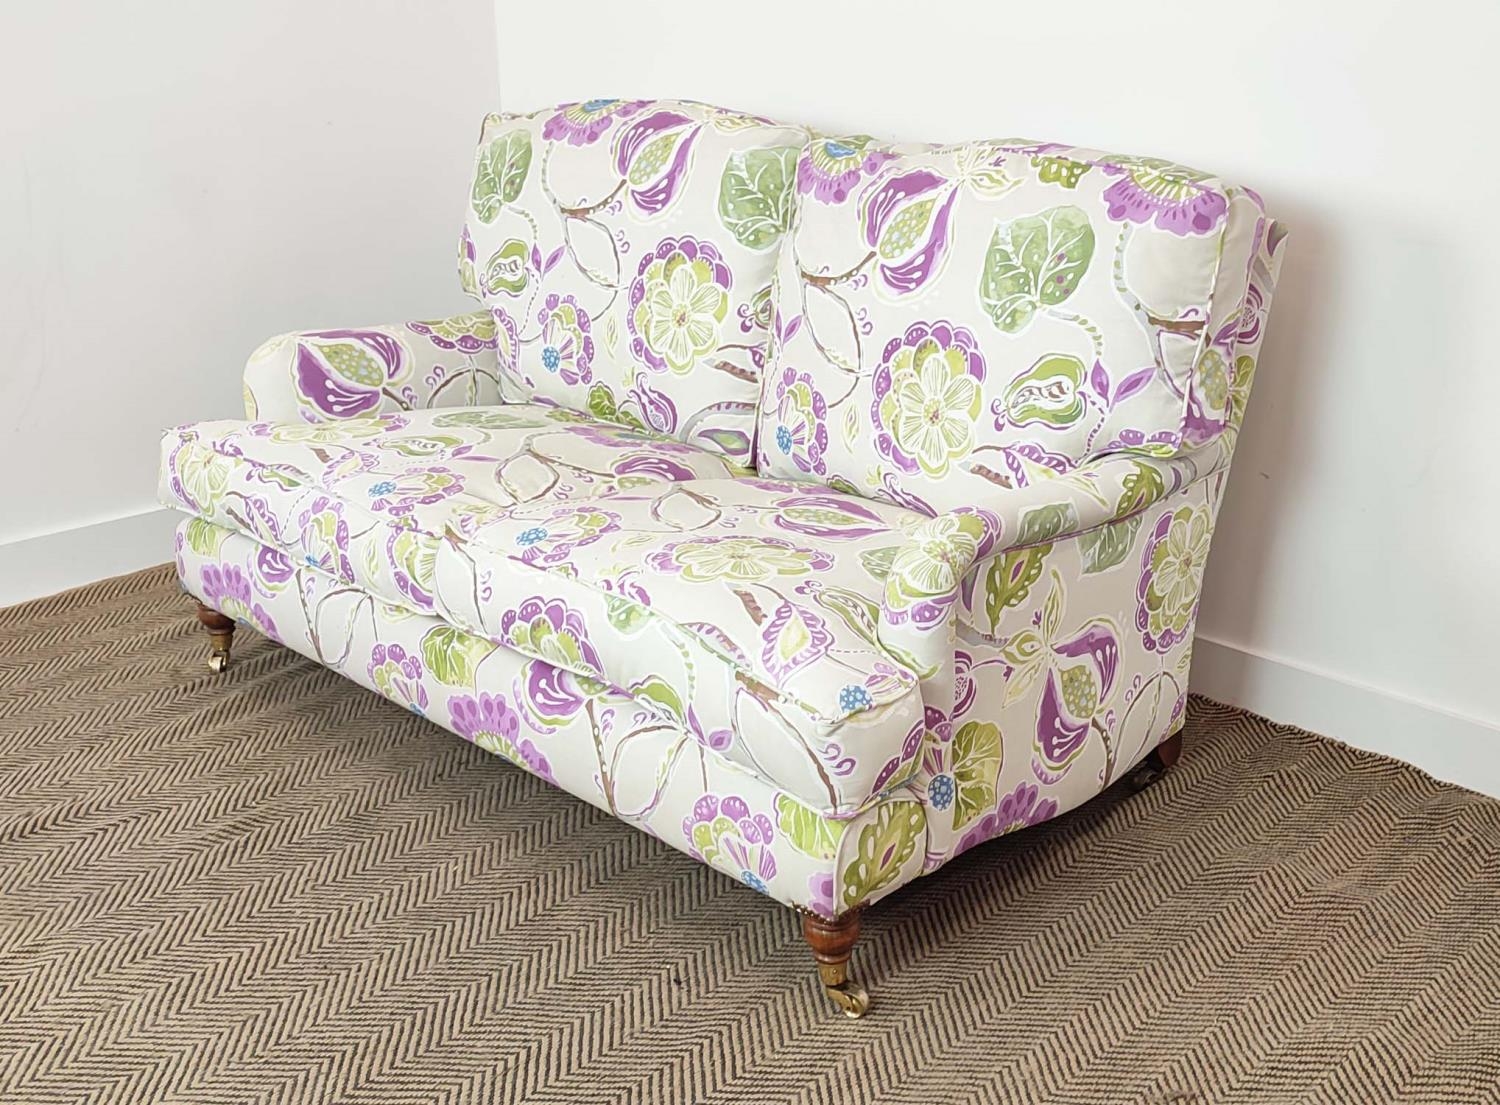 SOFA, purple and green floral patterned on brass castors, 90cm H x 160cm W. - Image 5 of 14